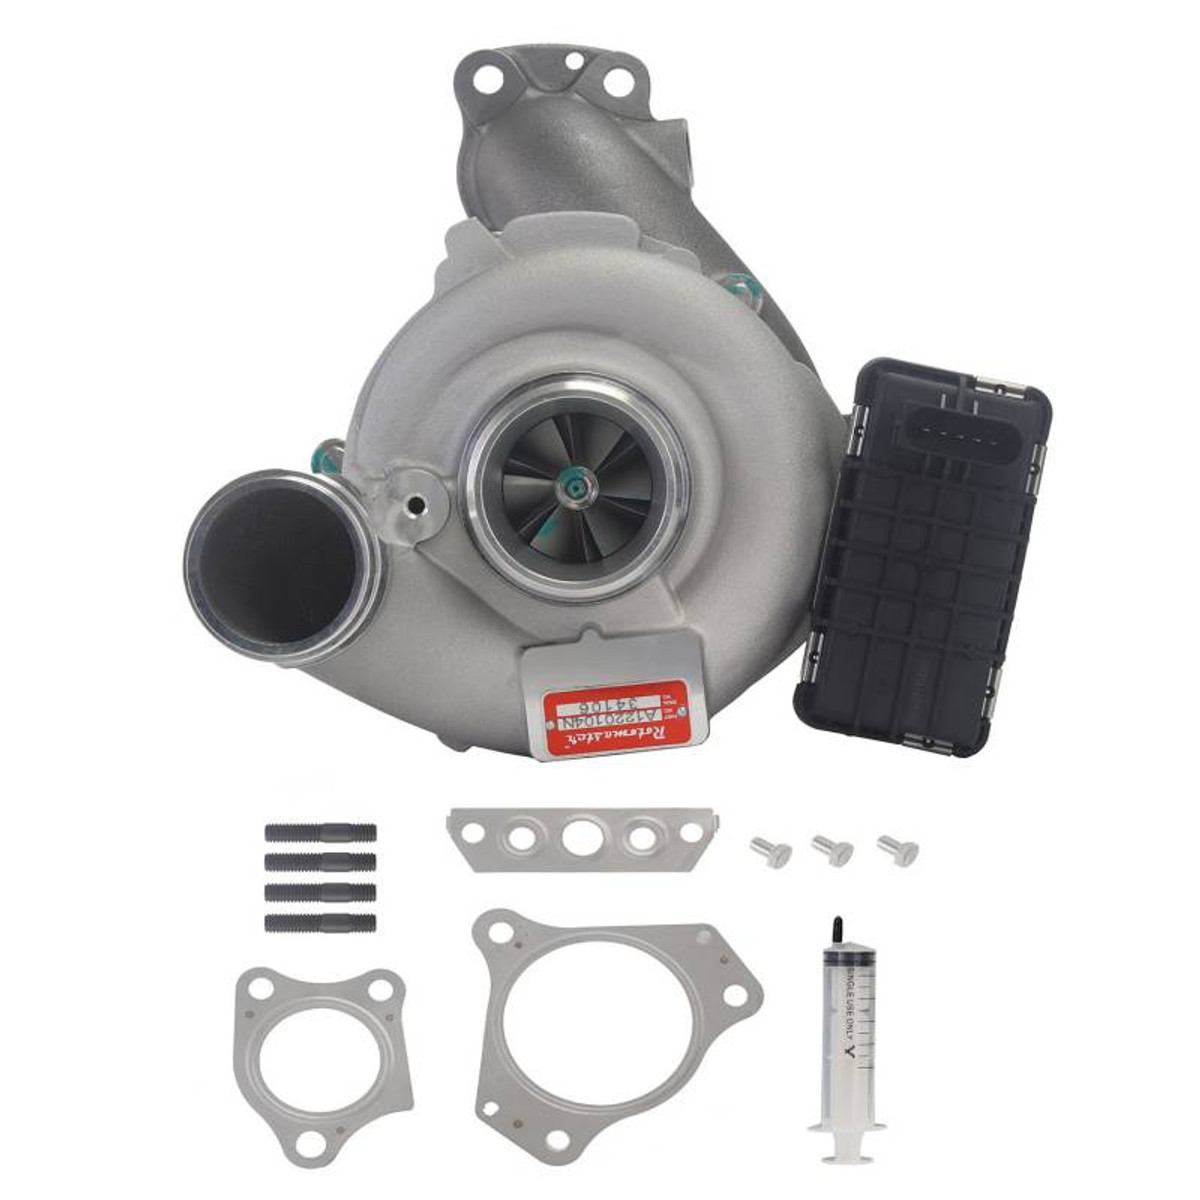 Rotomaster New Turbocharger - 2007-2012 Jeep / Mercedes-Benz 3.0L A1220104N